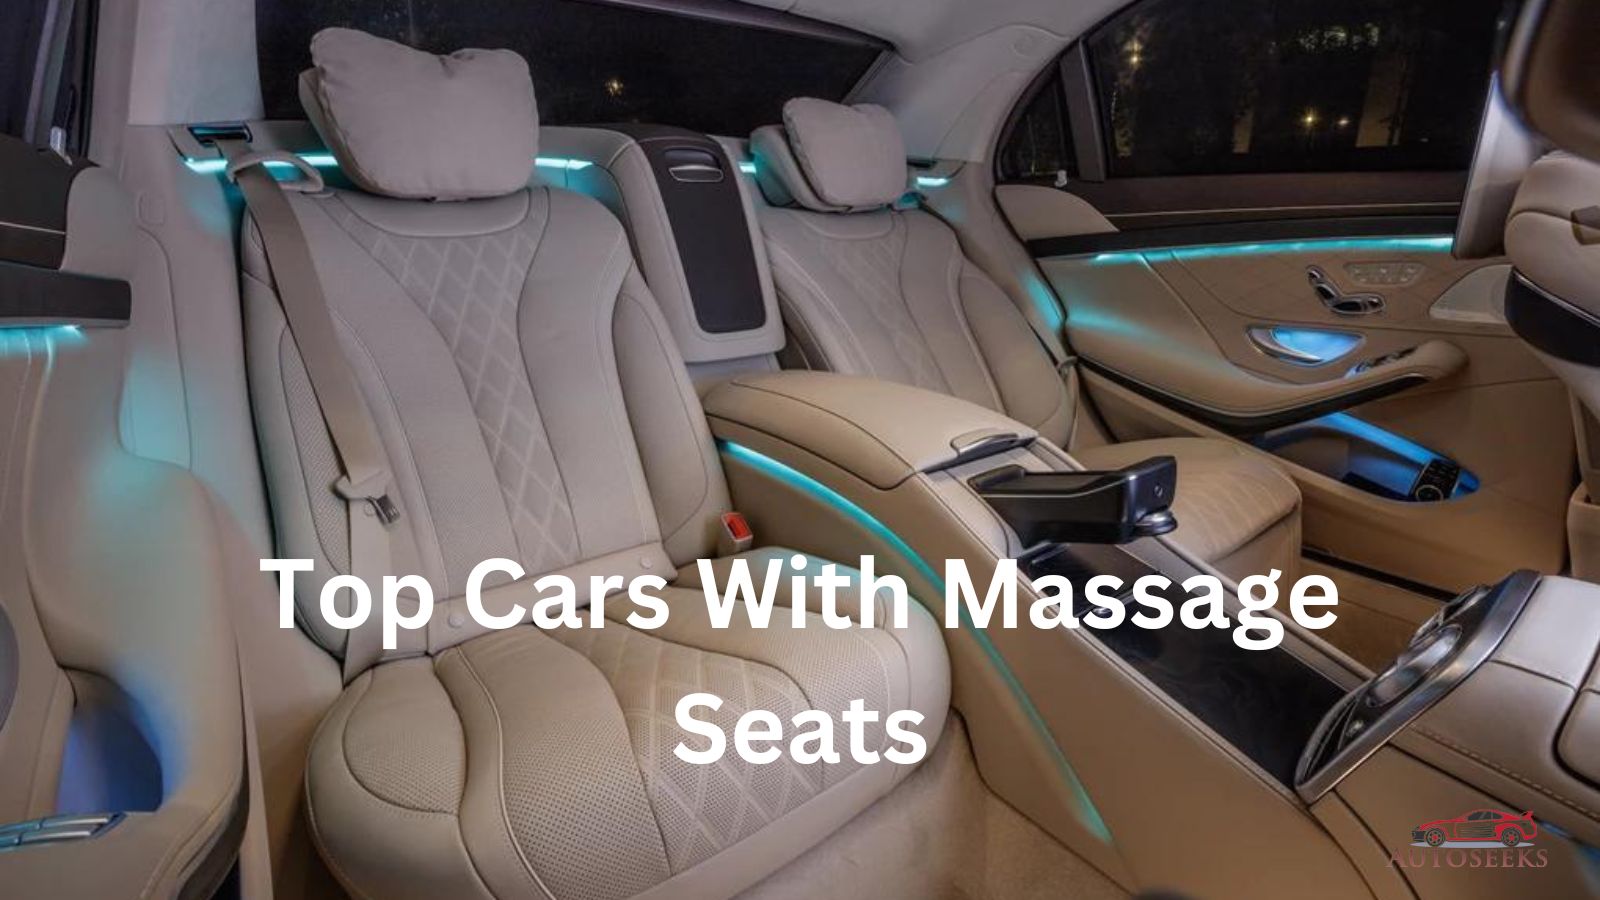 Top 8 Cars With Massage Seats for StressFree Driving In 2023